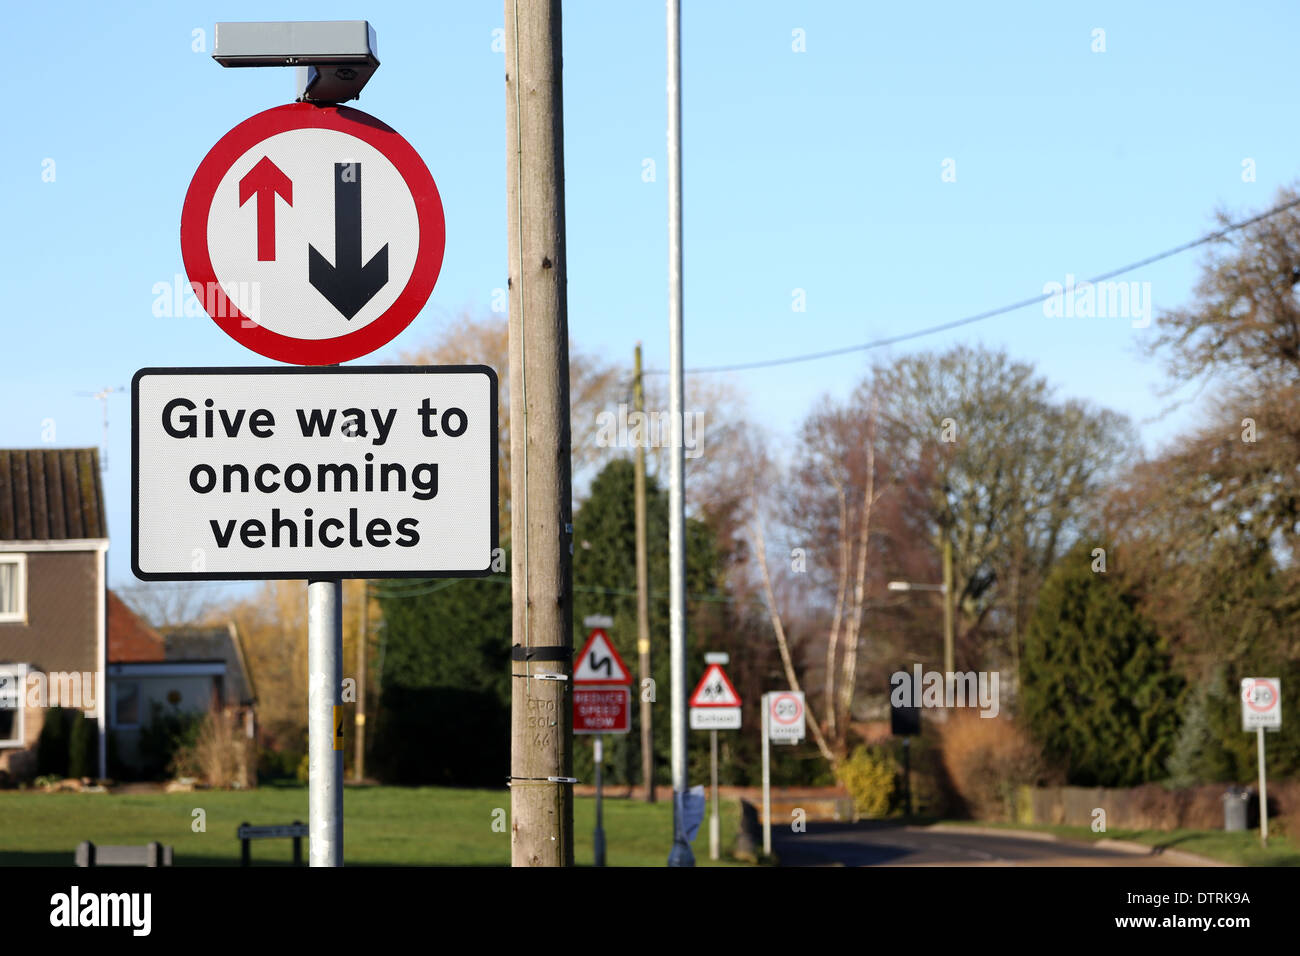 Give way to oncoming vehicles sign in Bugbrooke, Northamptonshire Stock Photo